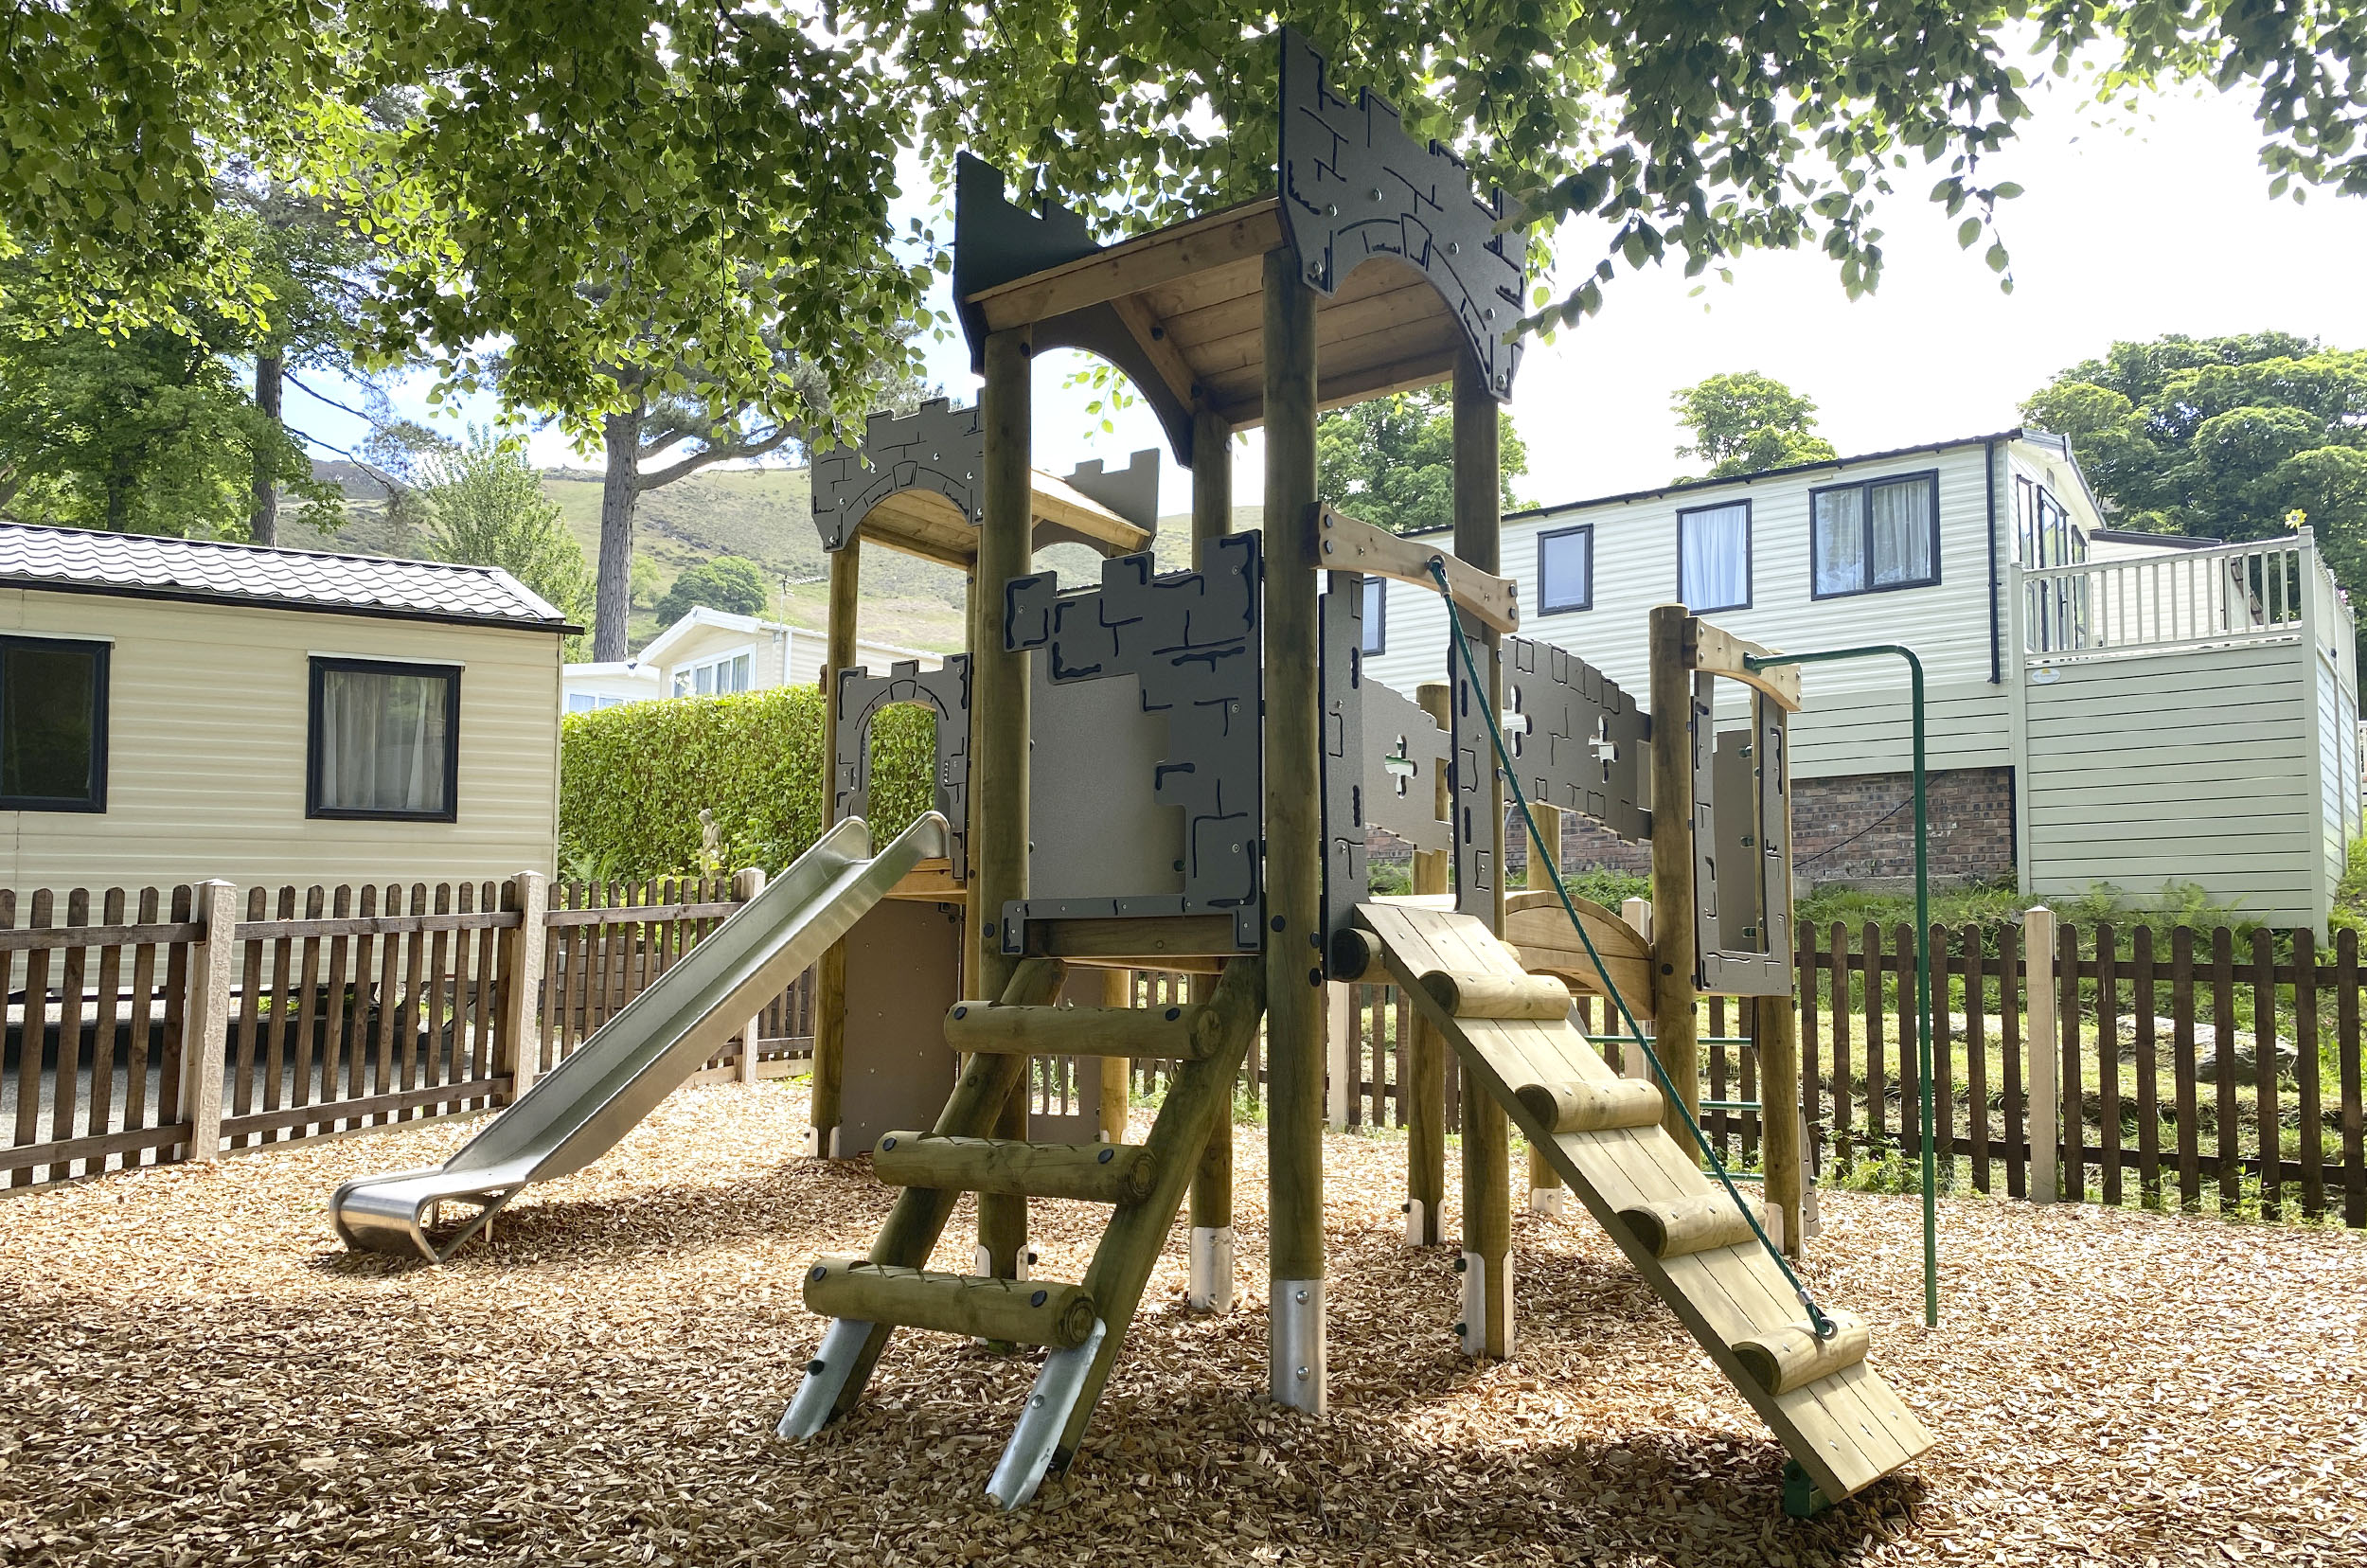 Craiglwyd Hall Caravan Park, a grey castle themed with timber legs play tower with a slide to the left, a ladder an ramp in the middle and a bridge to tower and fire mans pole on the right it sits on wood chip safer surfacing. with trees, a fence and two caravans in the background